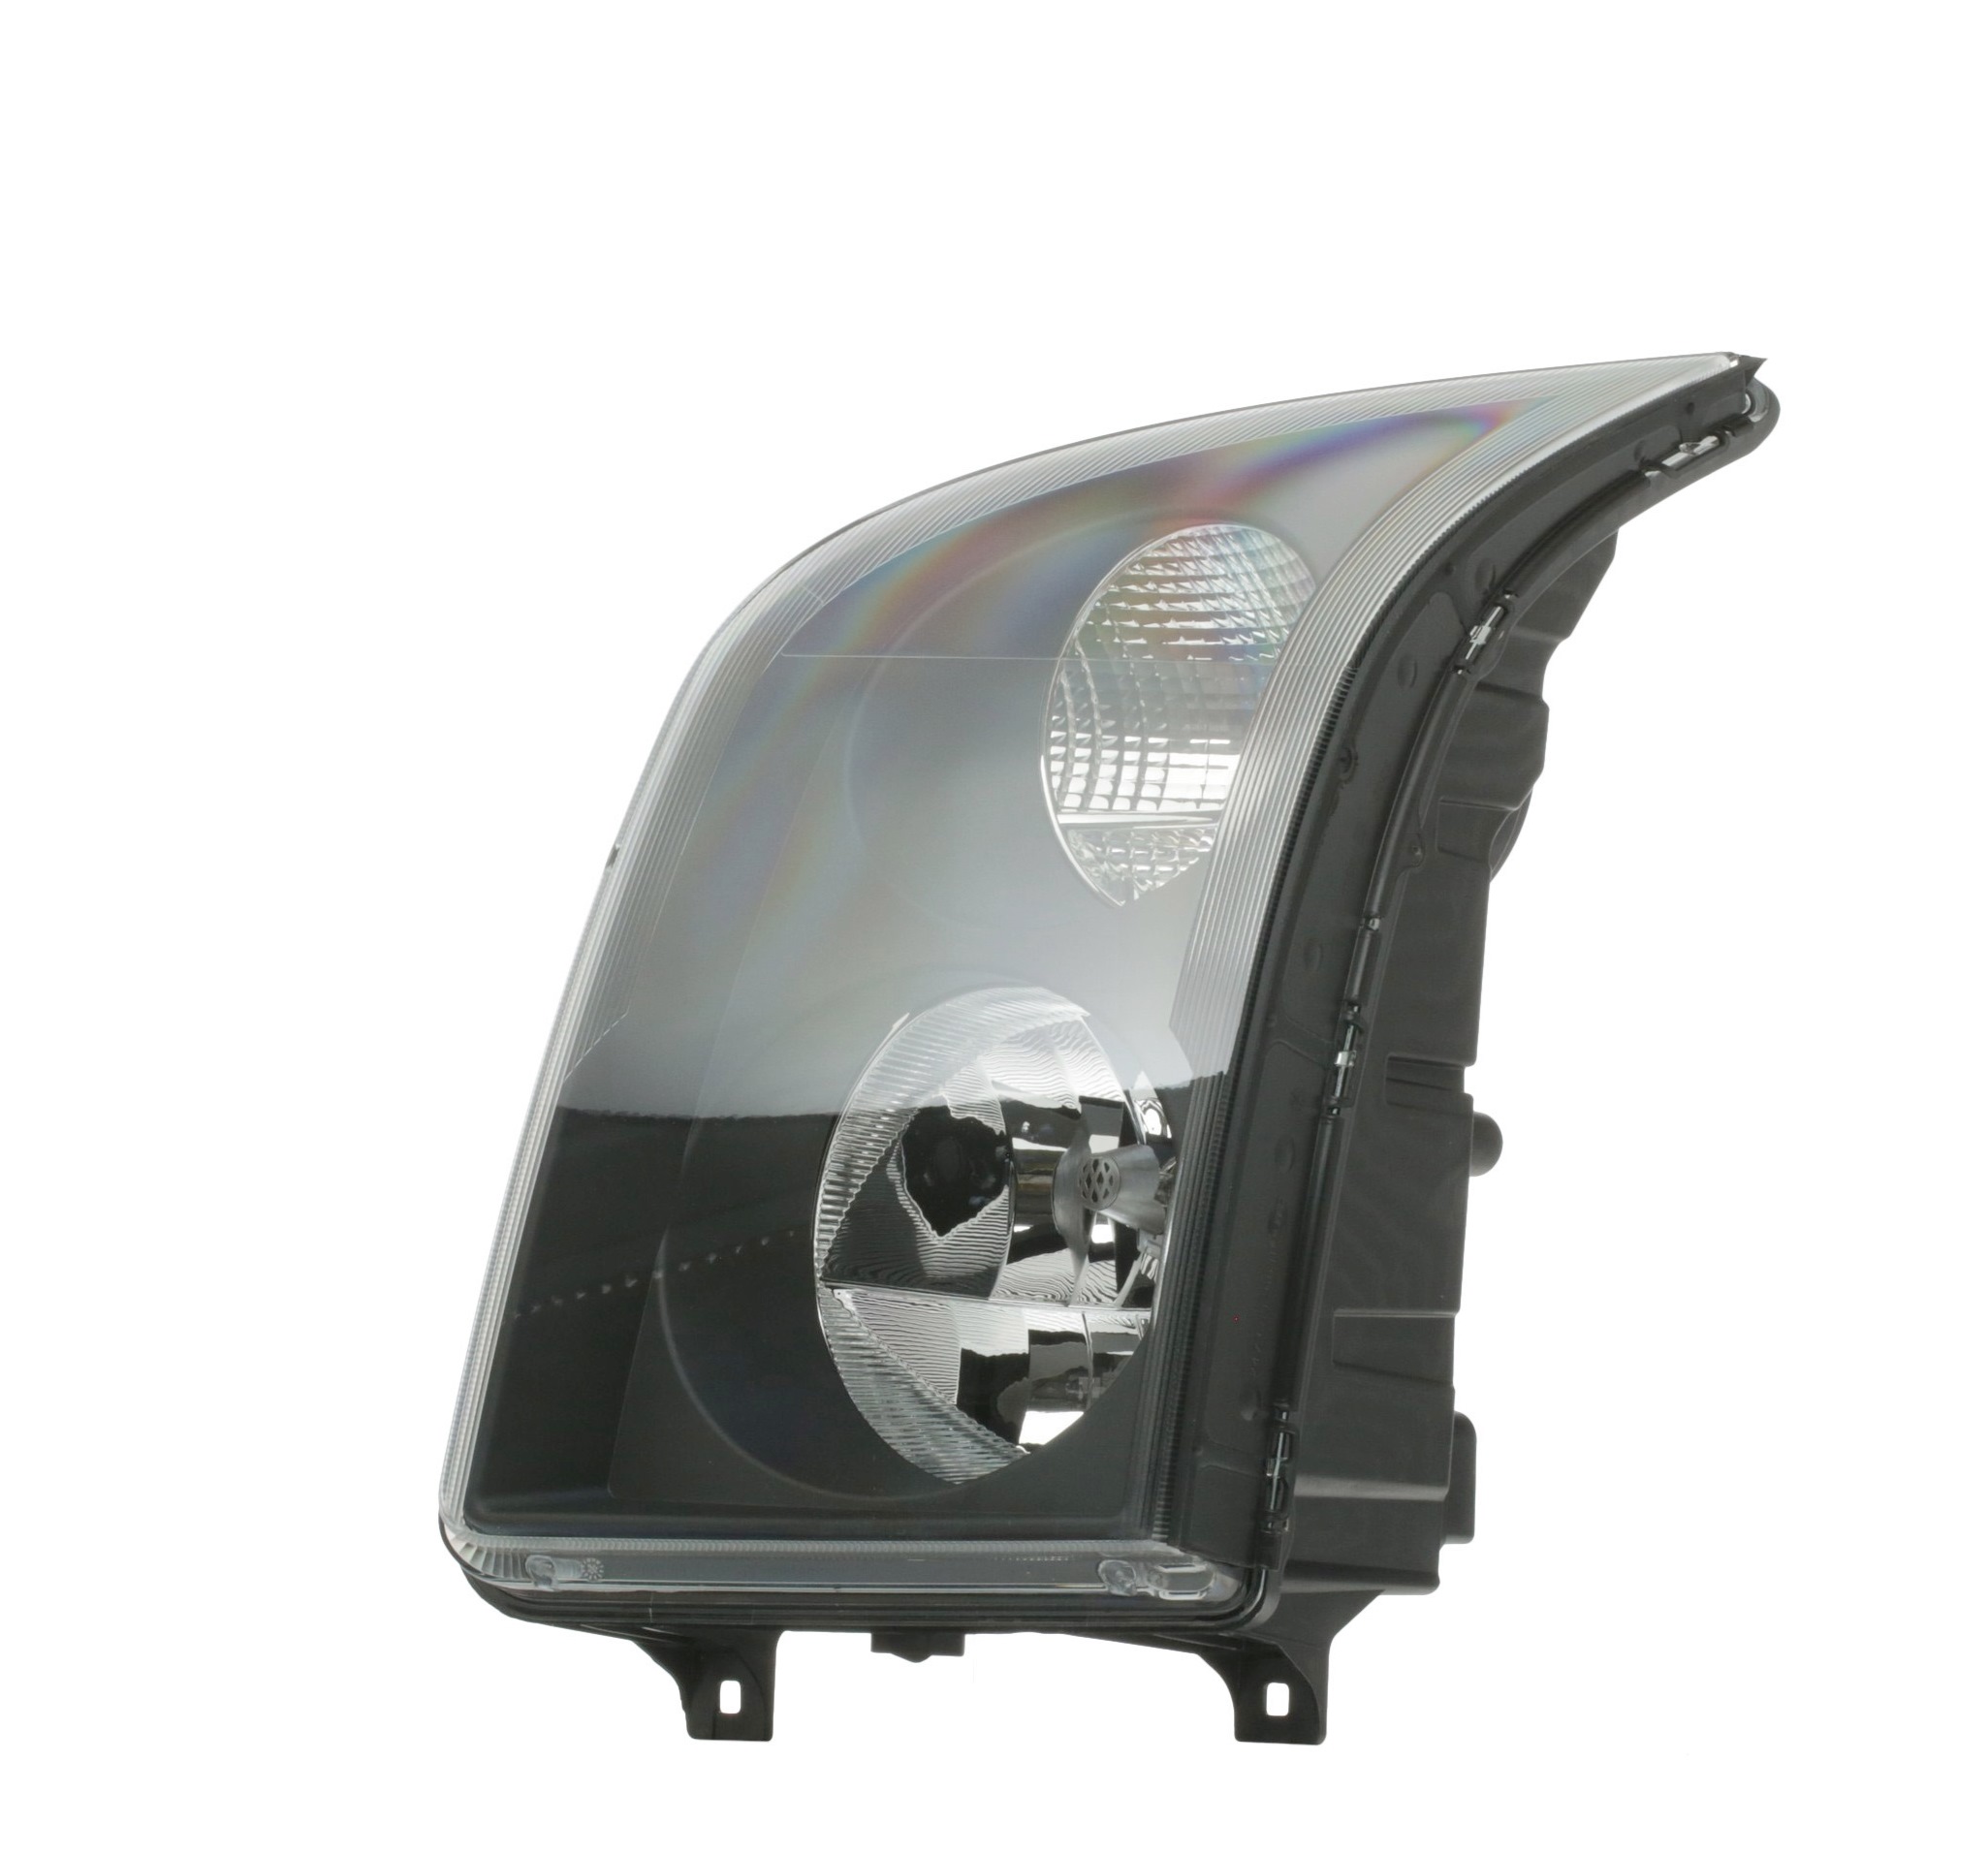 HELLA 1ER 247 017-051 Headlight Left, W5W, PY21W, H7/H7, FF, Halogen, 12V, with low beam, with indicator, with high beam, with position light, for right-hand traffic, with bulbs, with motor for headlamp levelling